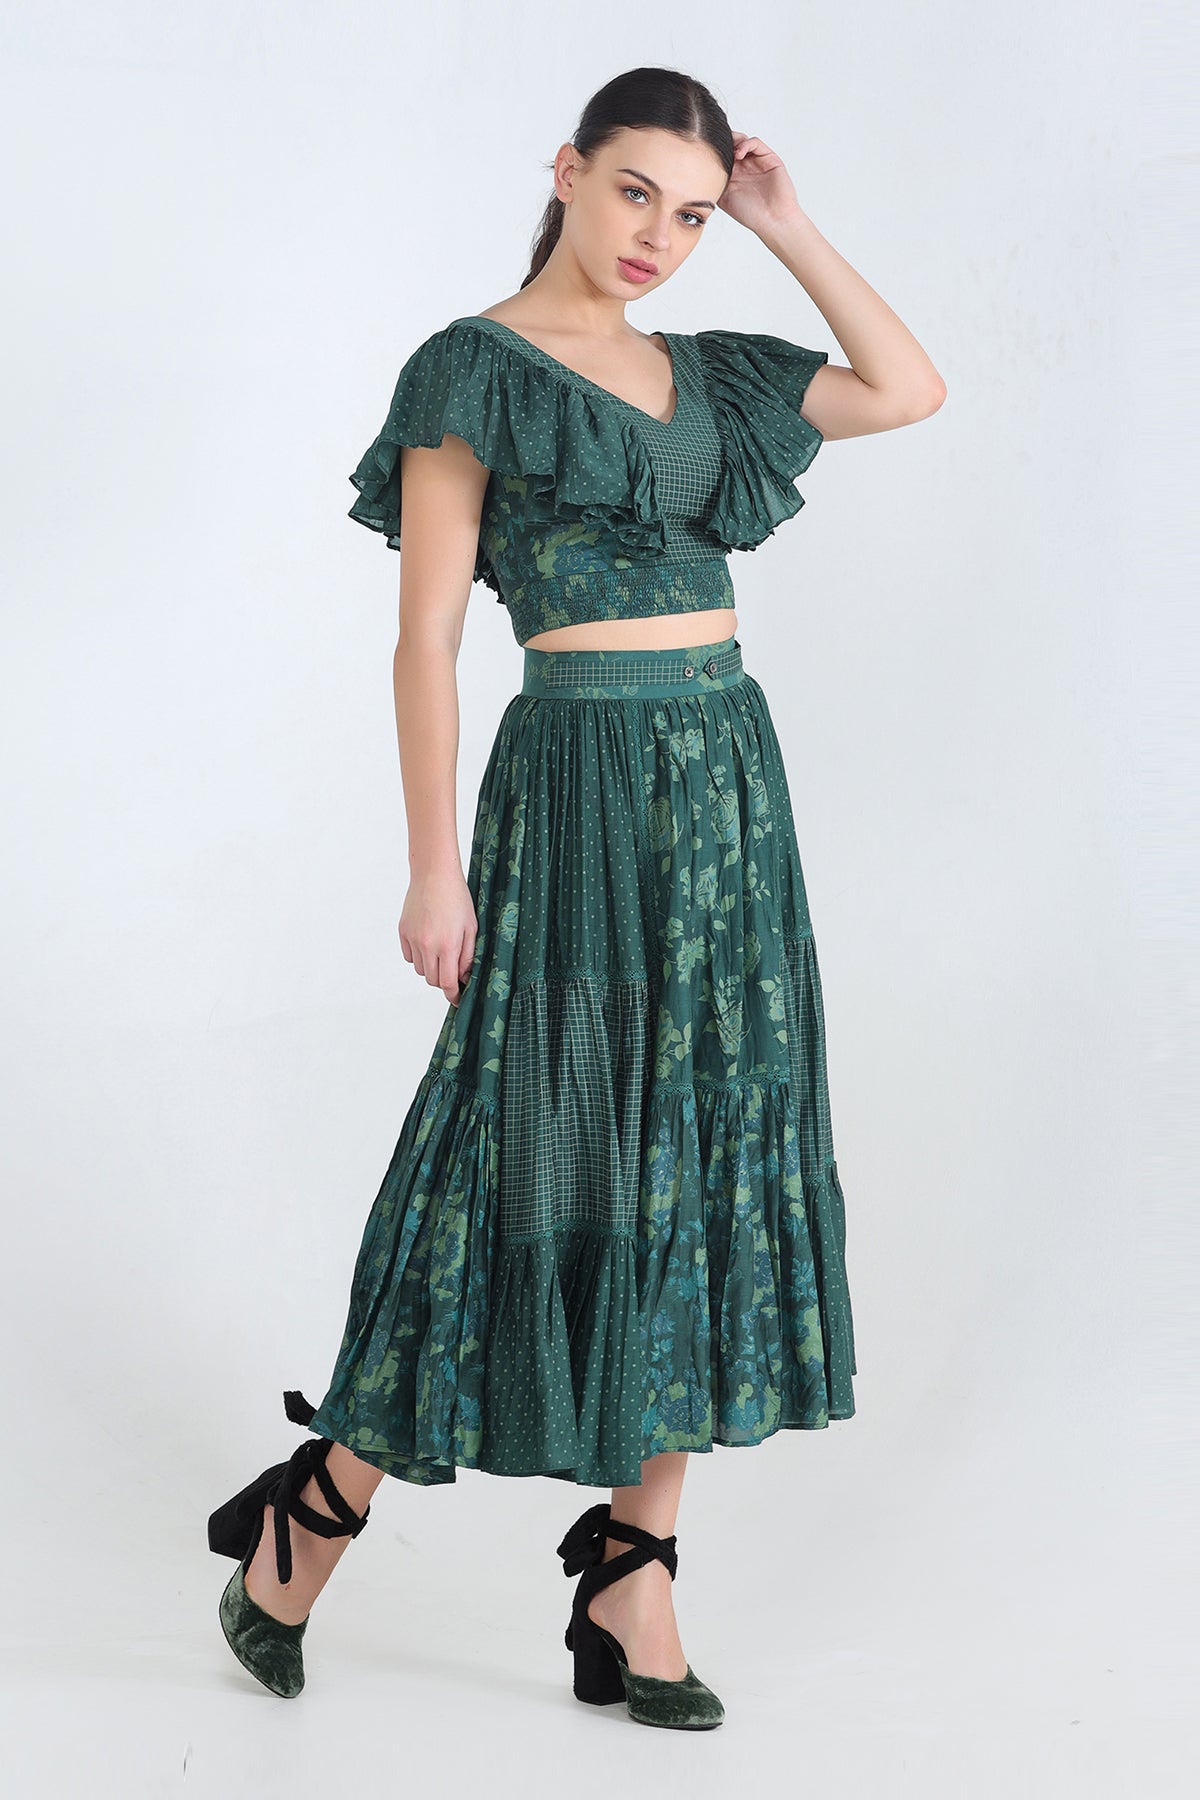 Green Print Mix Monochrome Gathered Skirt With Insertion Details